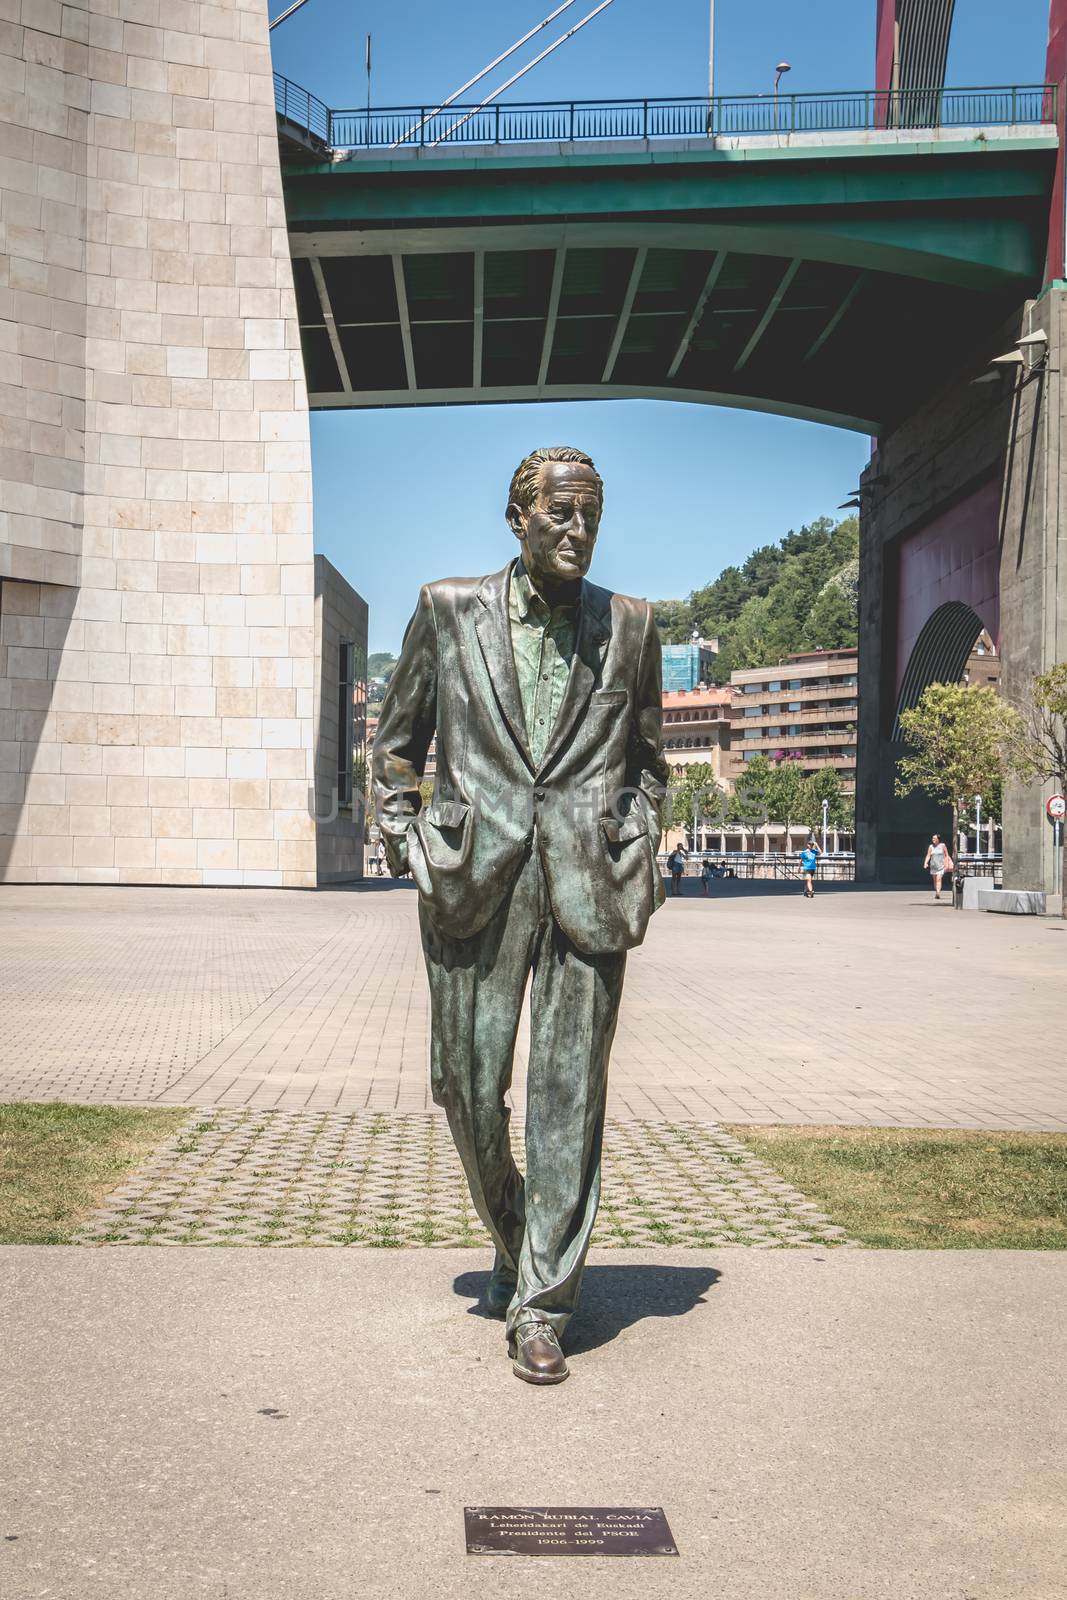 Bilbao, Spain - July 19, 2017: Monument of the socialist leader Ramon Rubial Cavia by Casto Solano, In front of the Guggenheim museum on a summer day